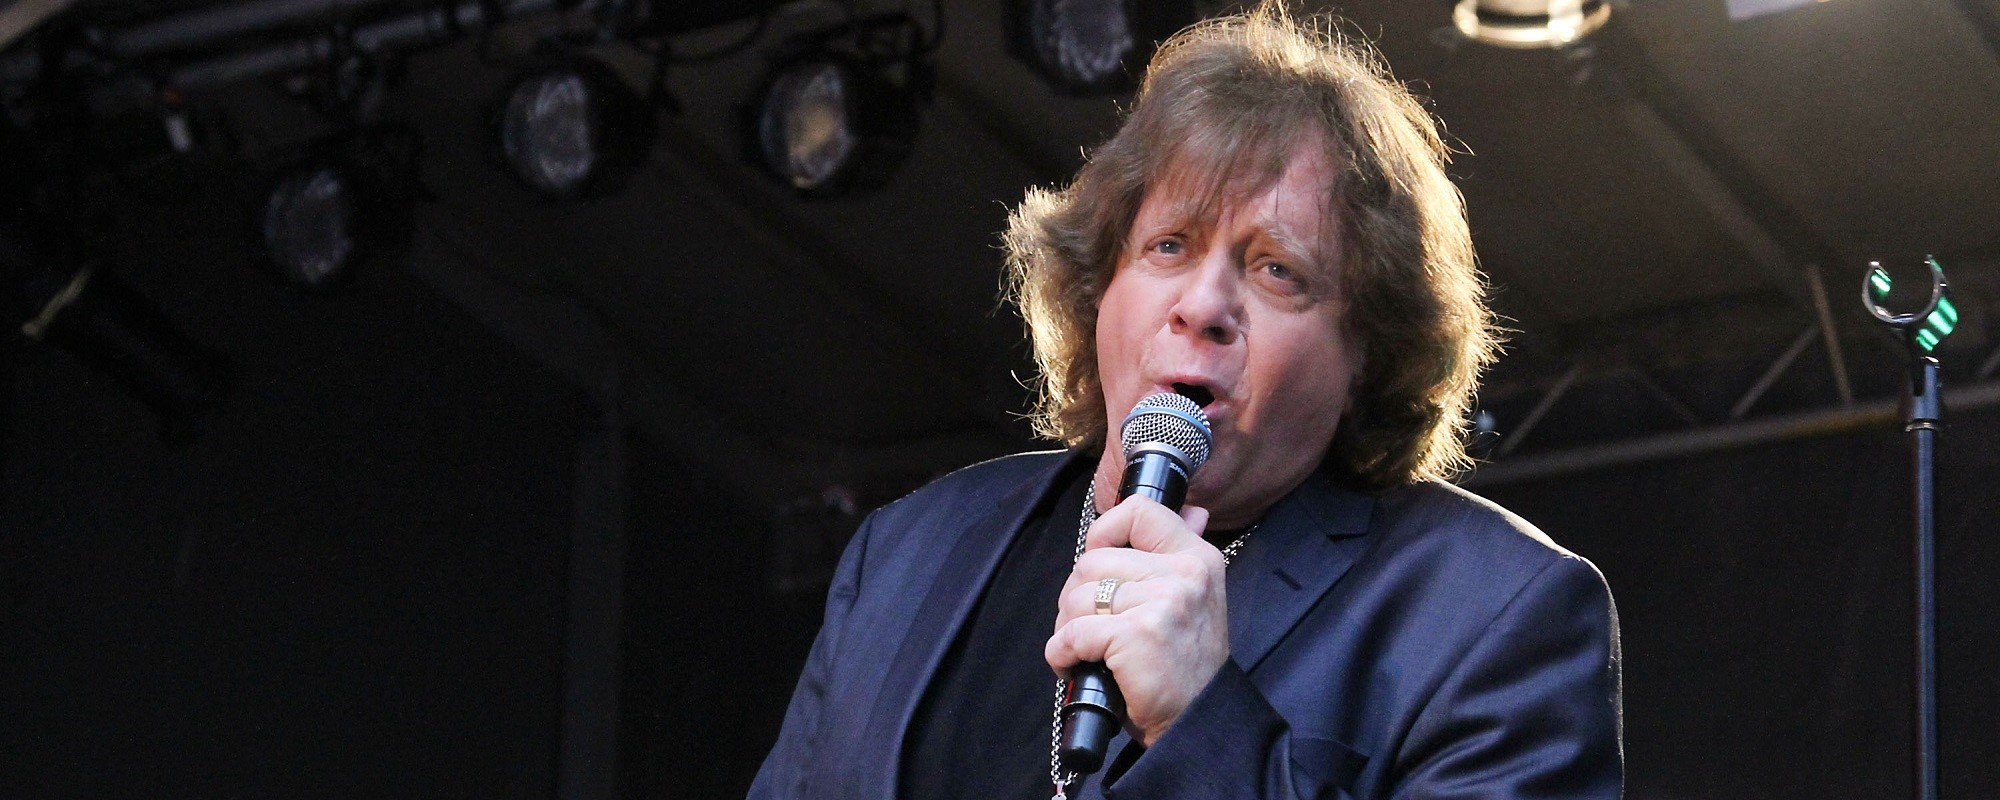 5 Fascinating Fact About Eddie Money on Late Singer’s 75th Birthday